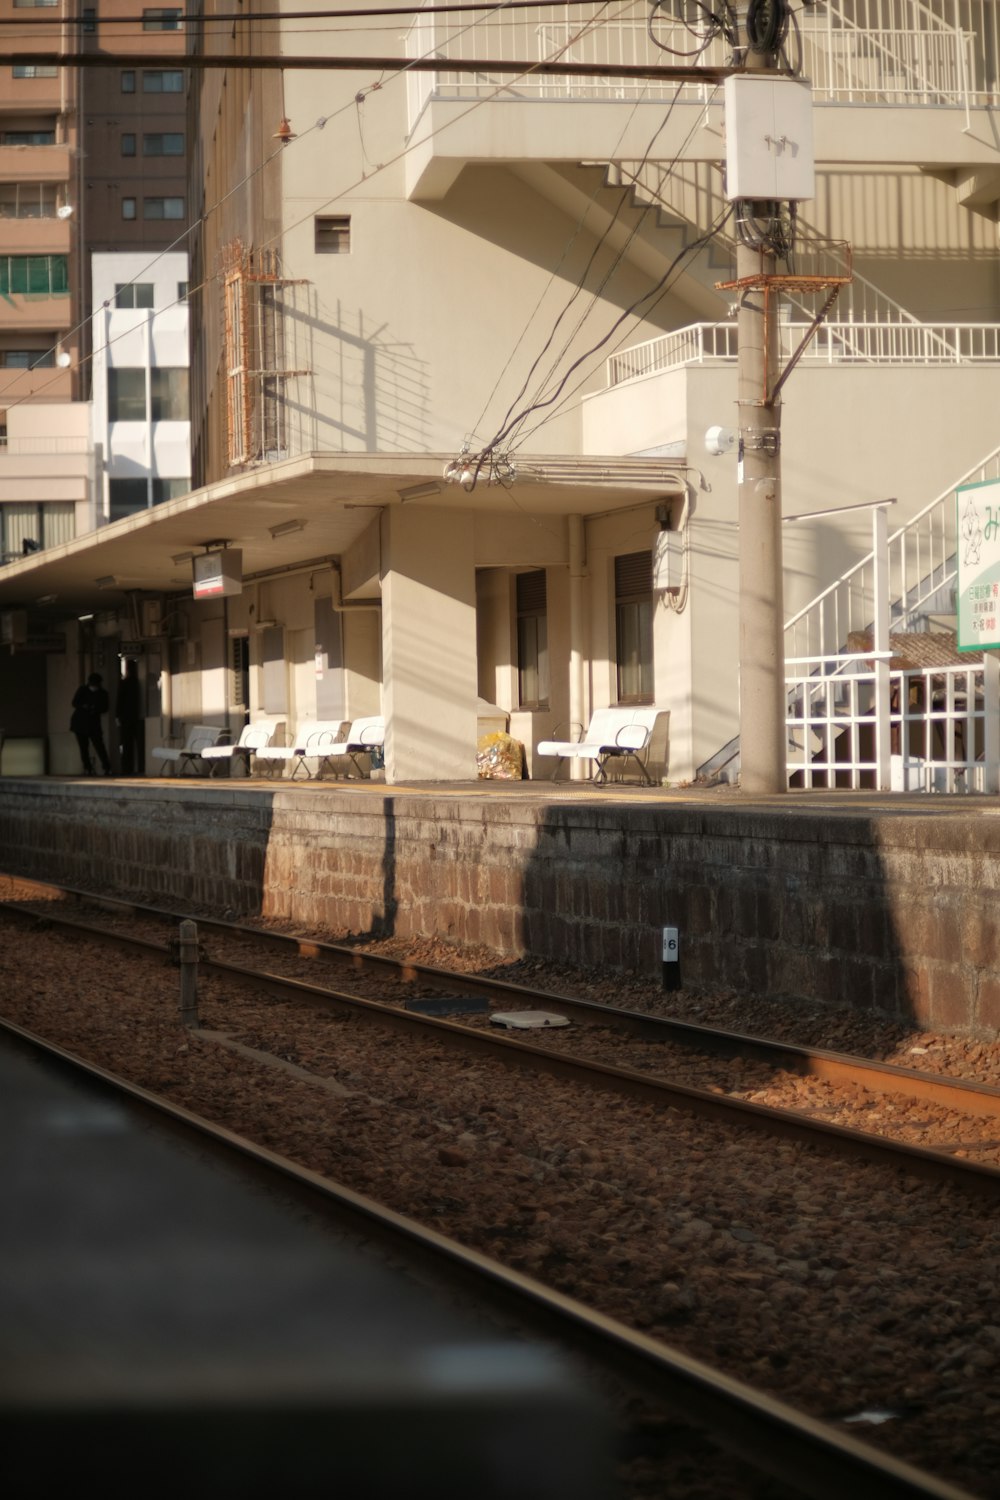 a train traveling past a tall building next to a train track